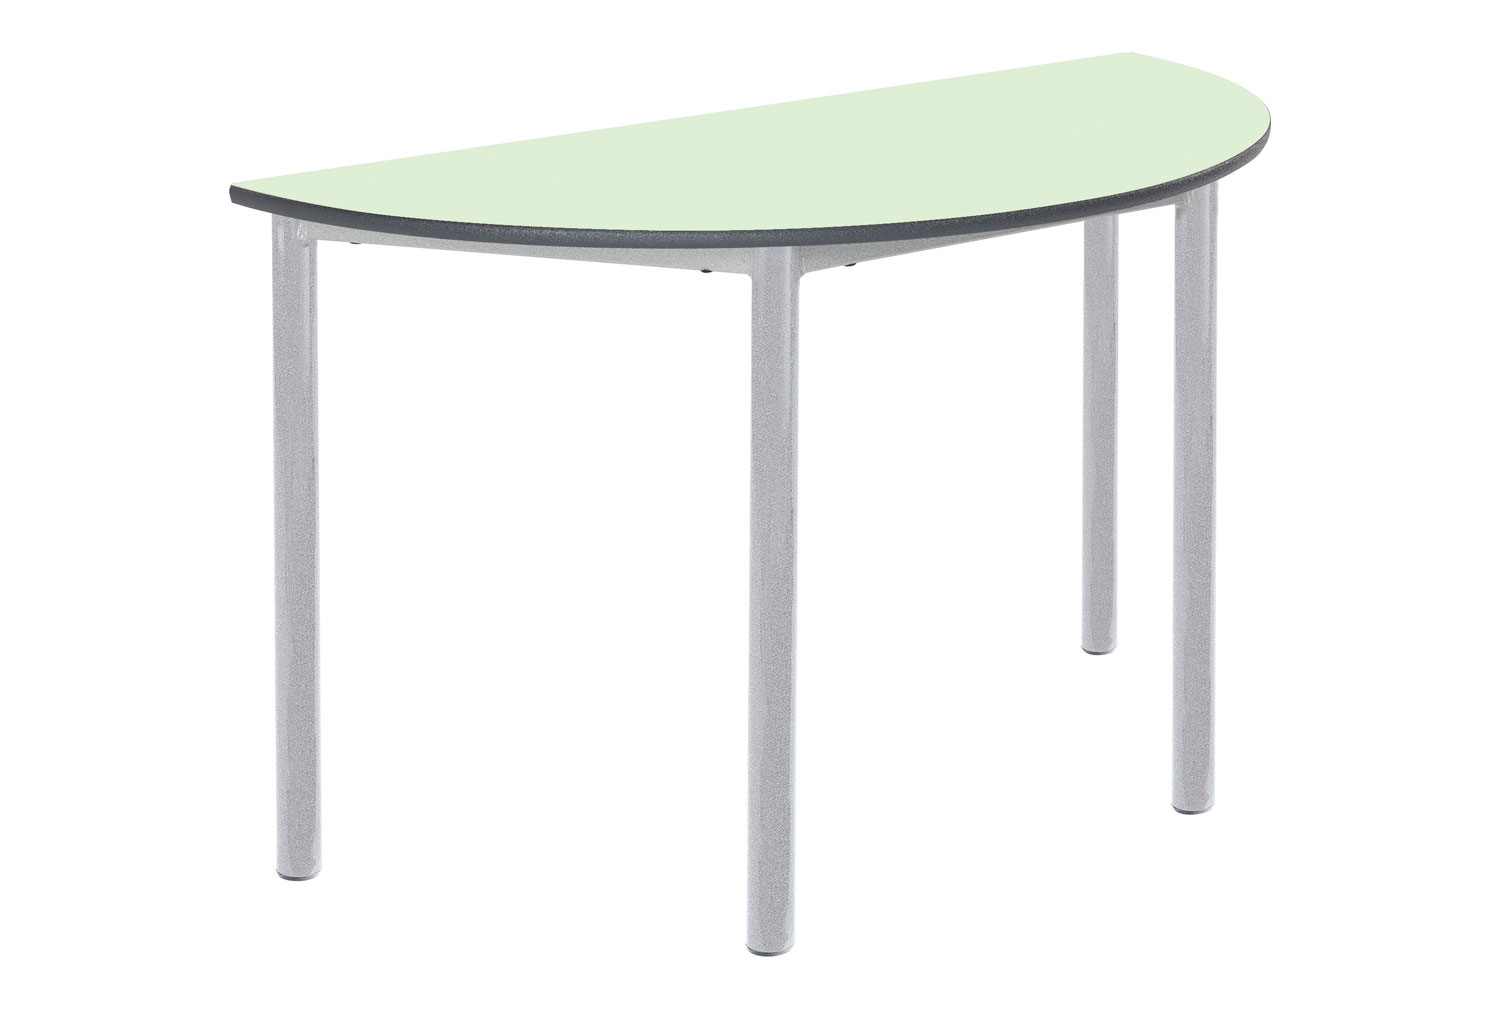 Qty 2 - RT45 Semi-Circular Classroom Tables 14+ Years, 120wx60dx76h (cm), Silver Frame, Red Top, PU Grey Edge